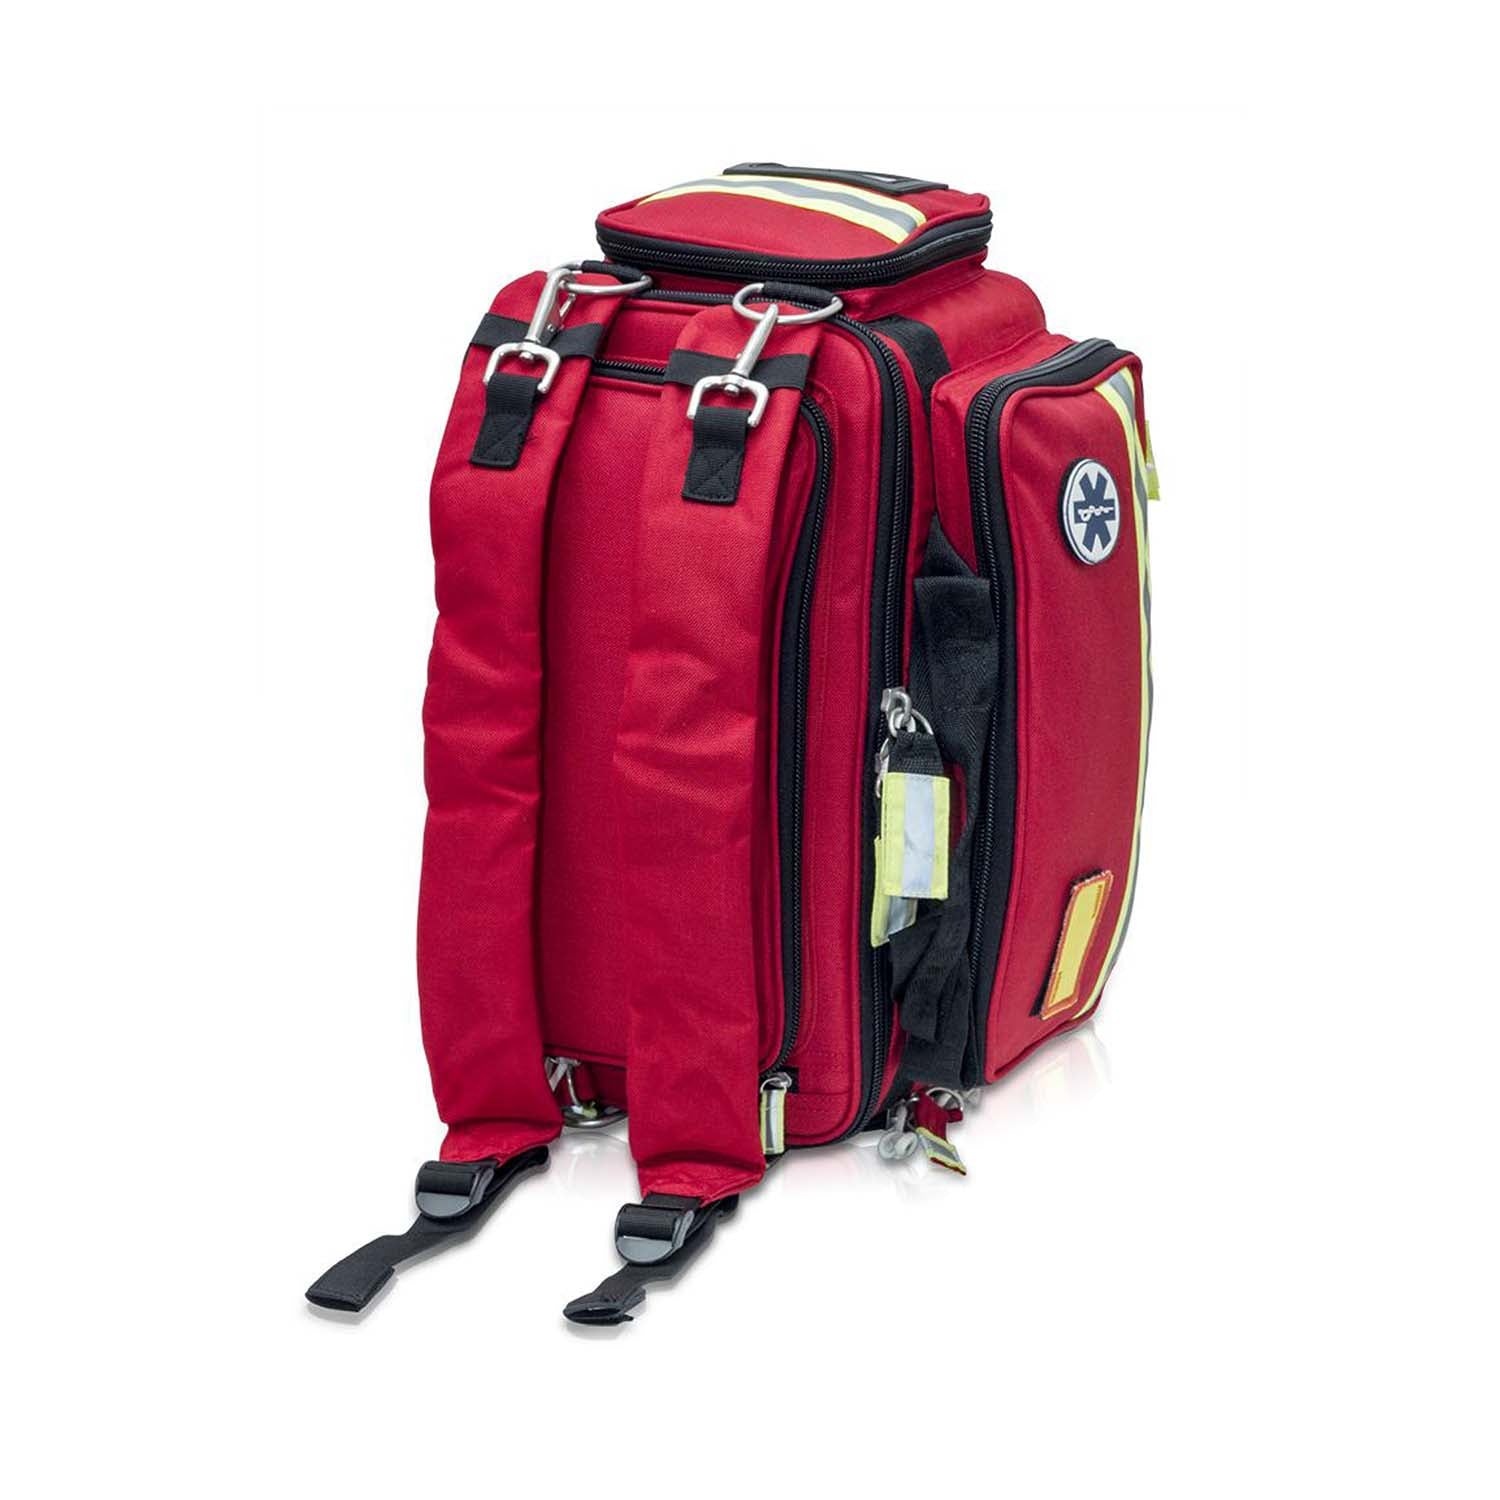 Emergency Bag for Basic Life Support | Red (1)